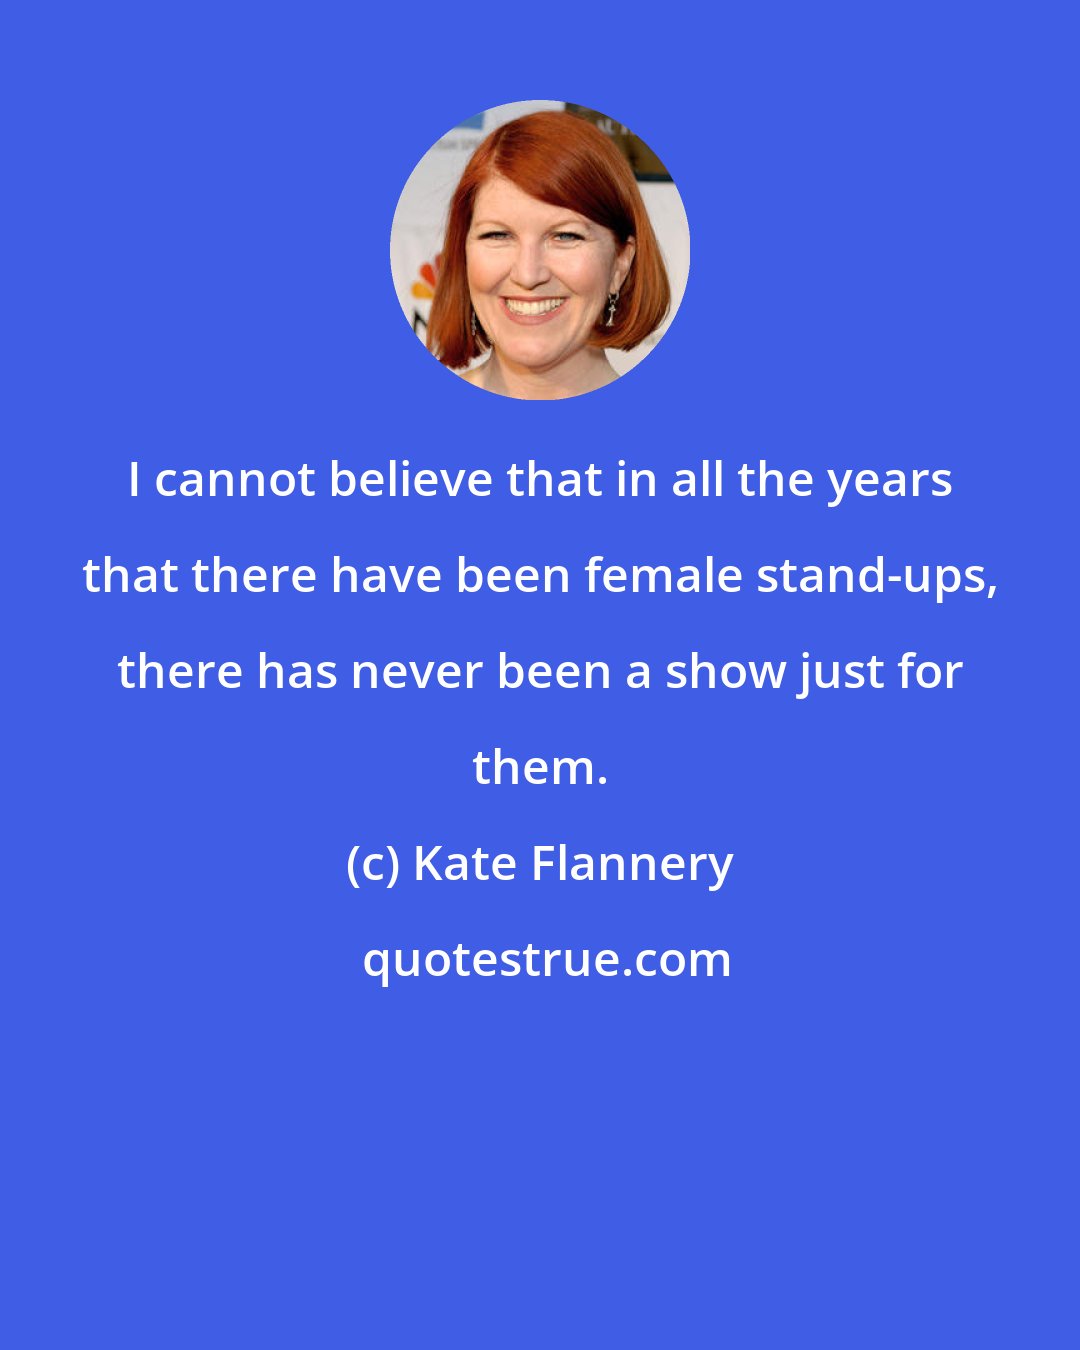 Kate Flannery: I cannot believe that in all the years that there have been female stand-ups, there has never been a show just for them.